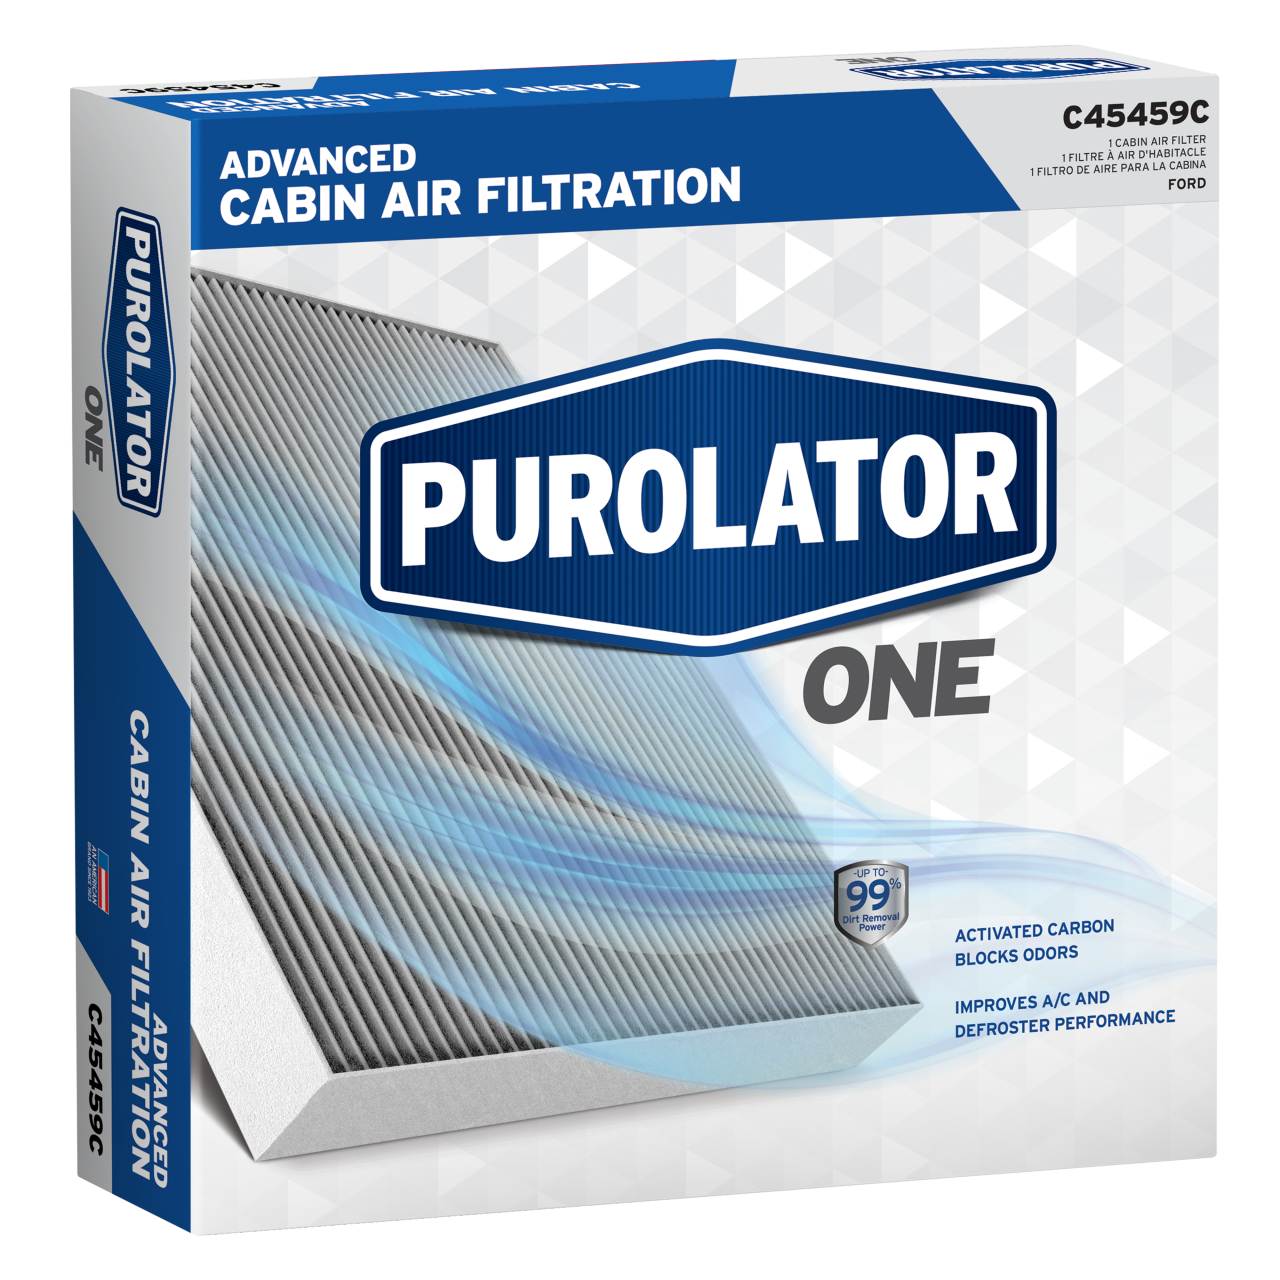 https://www.purolatornow.com/content/dam/website/purolator/product-pages/one-cabin-air/ONE_CabinAir_Box_4000x4000.png.transform/w.1280/image.png